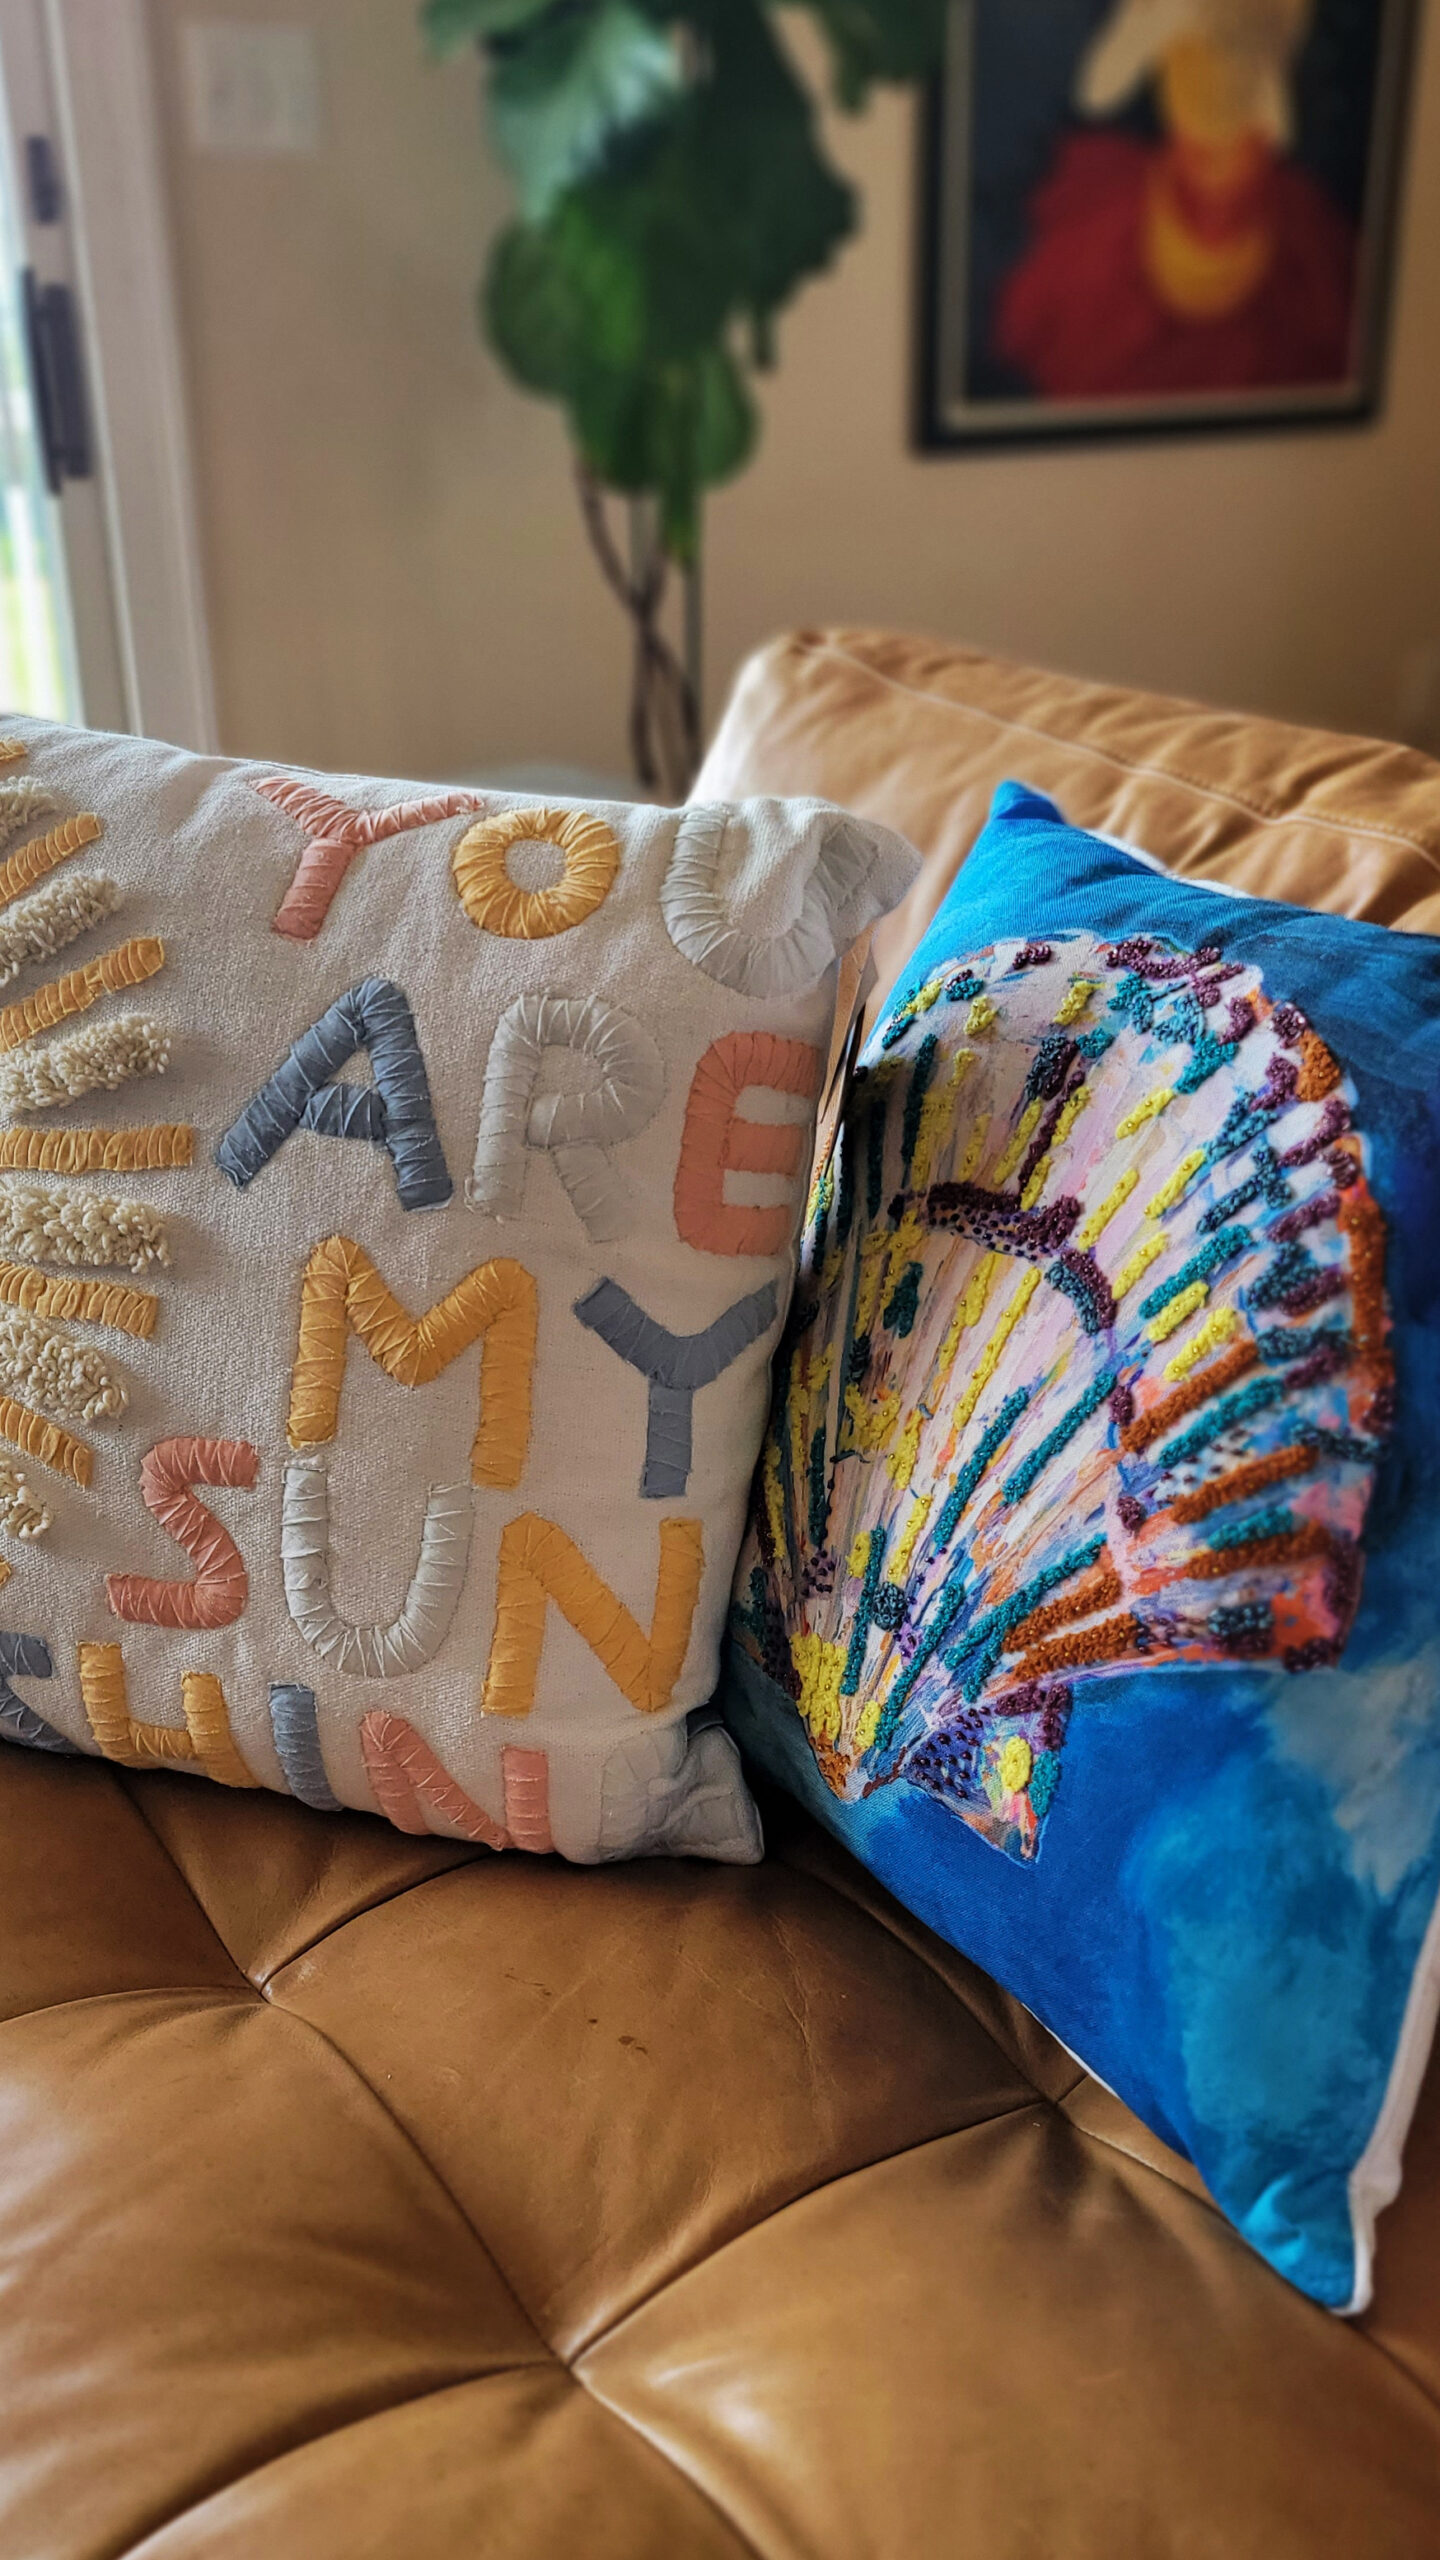 sample prop for Sky Blue Media's Summer Vibes promo service: Showing 2 decorative throw pillows on a camel leather couch. Pillows say "You are my sunshine" and the other had a multicolor shell embroidery